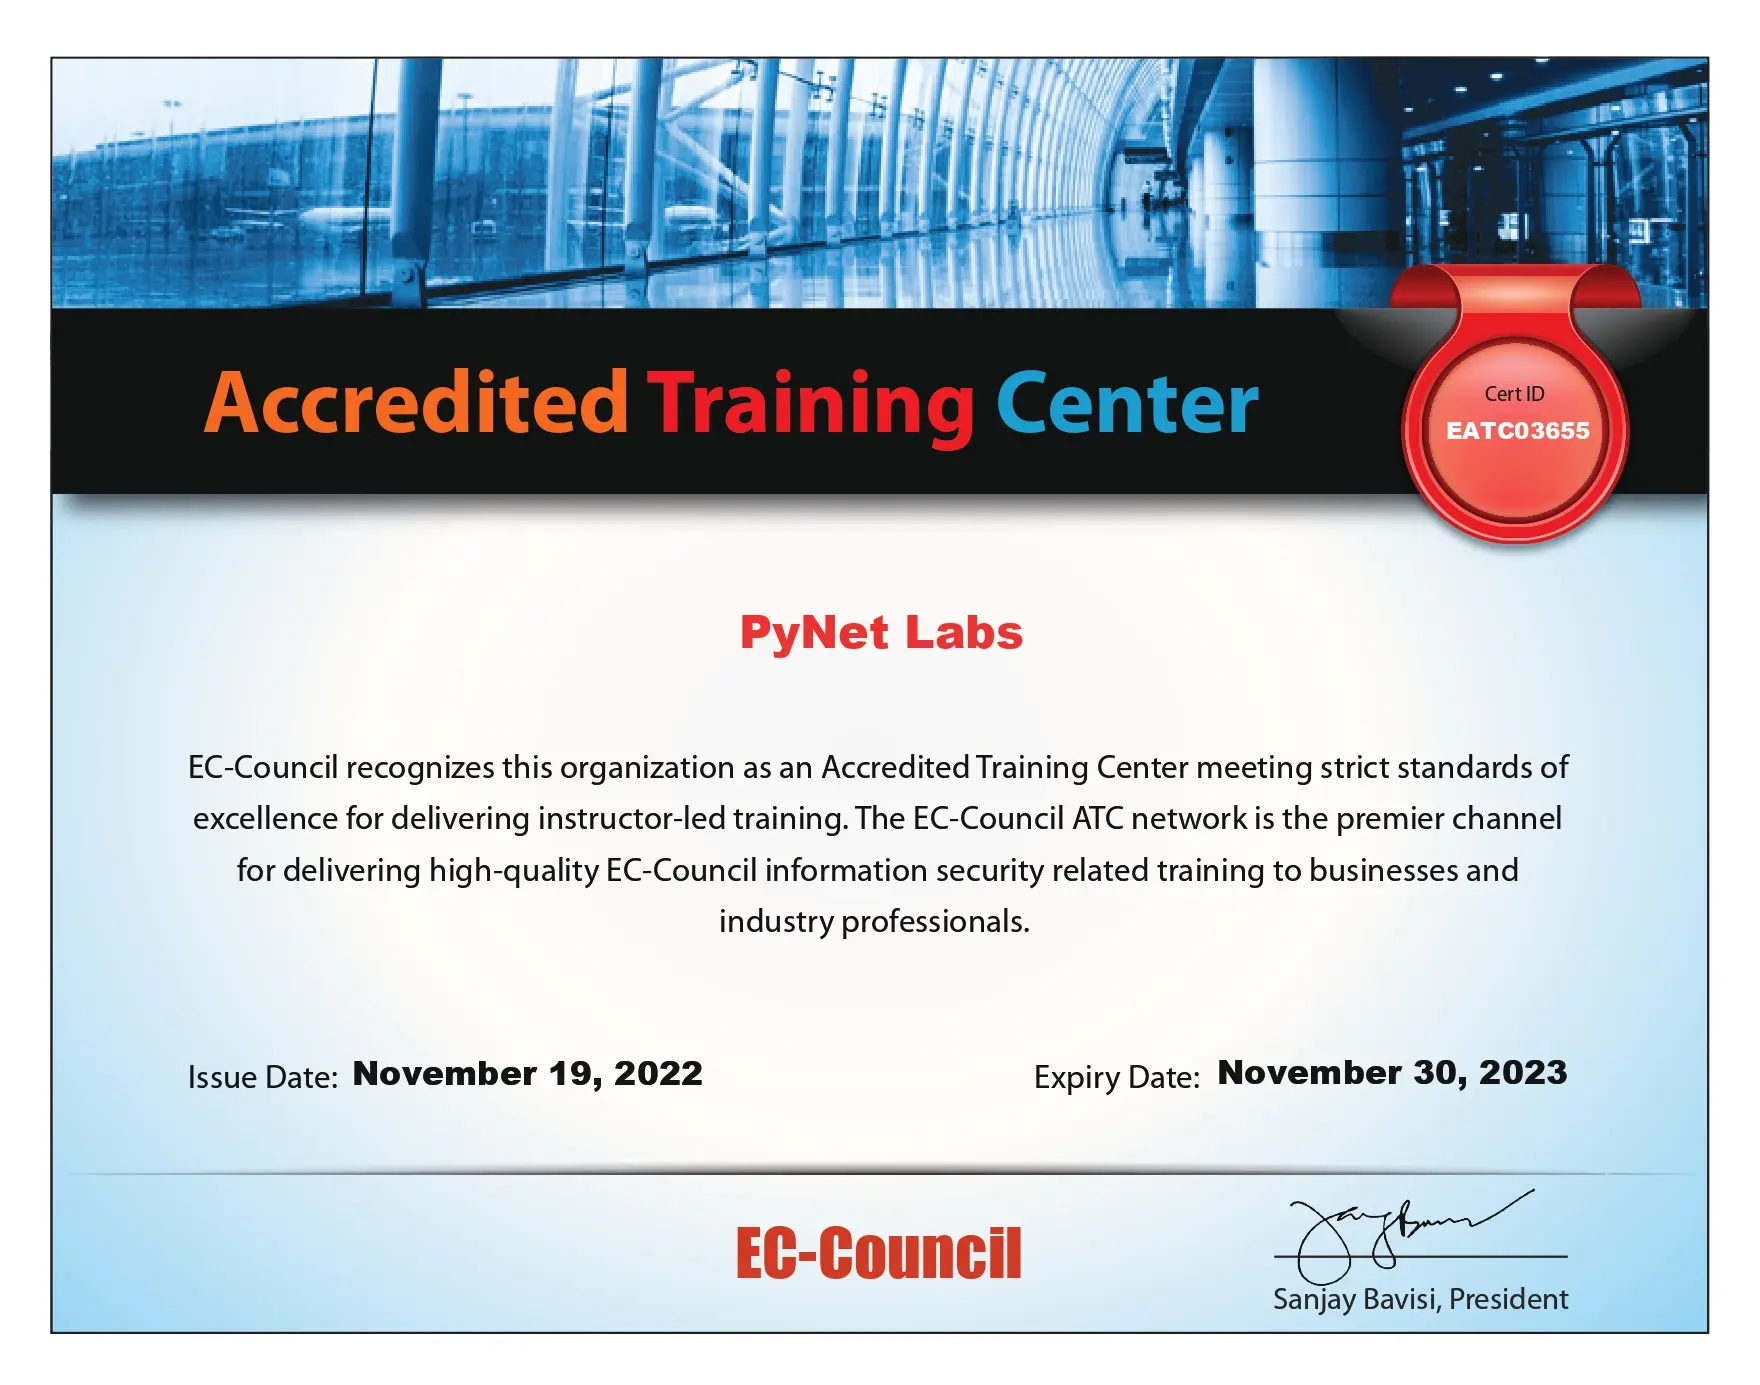 PyNet Labs' CEH Accredited Training Center Certificate